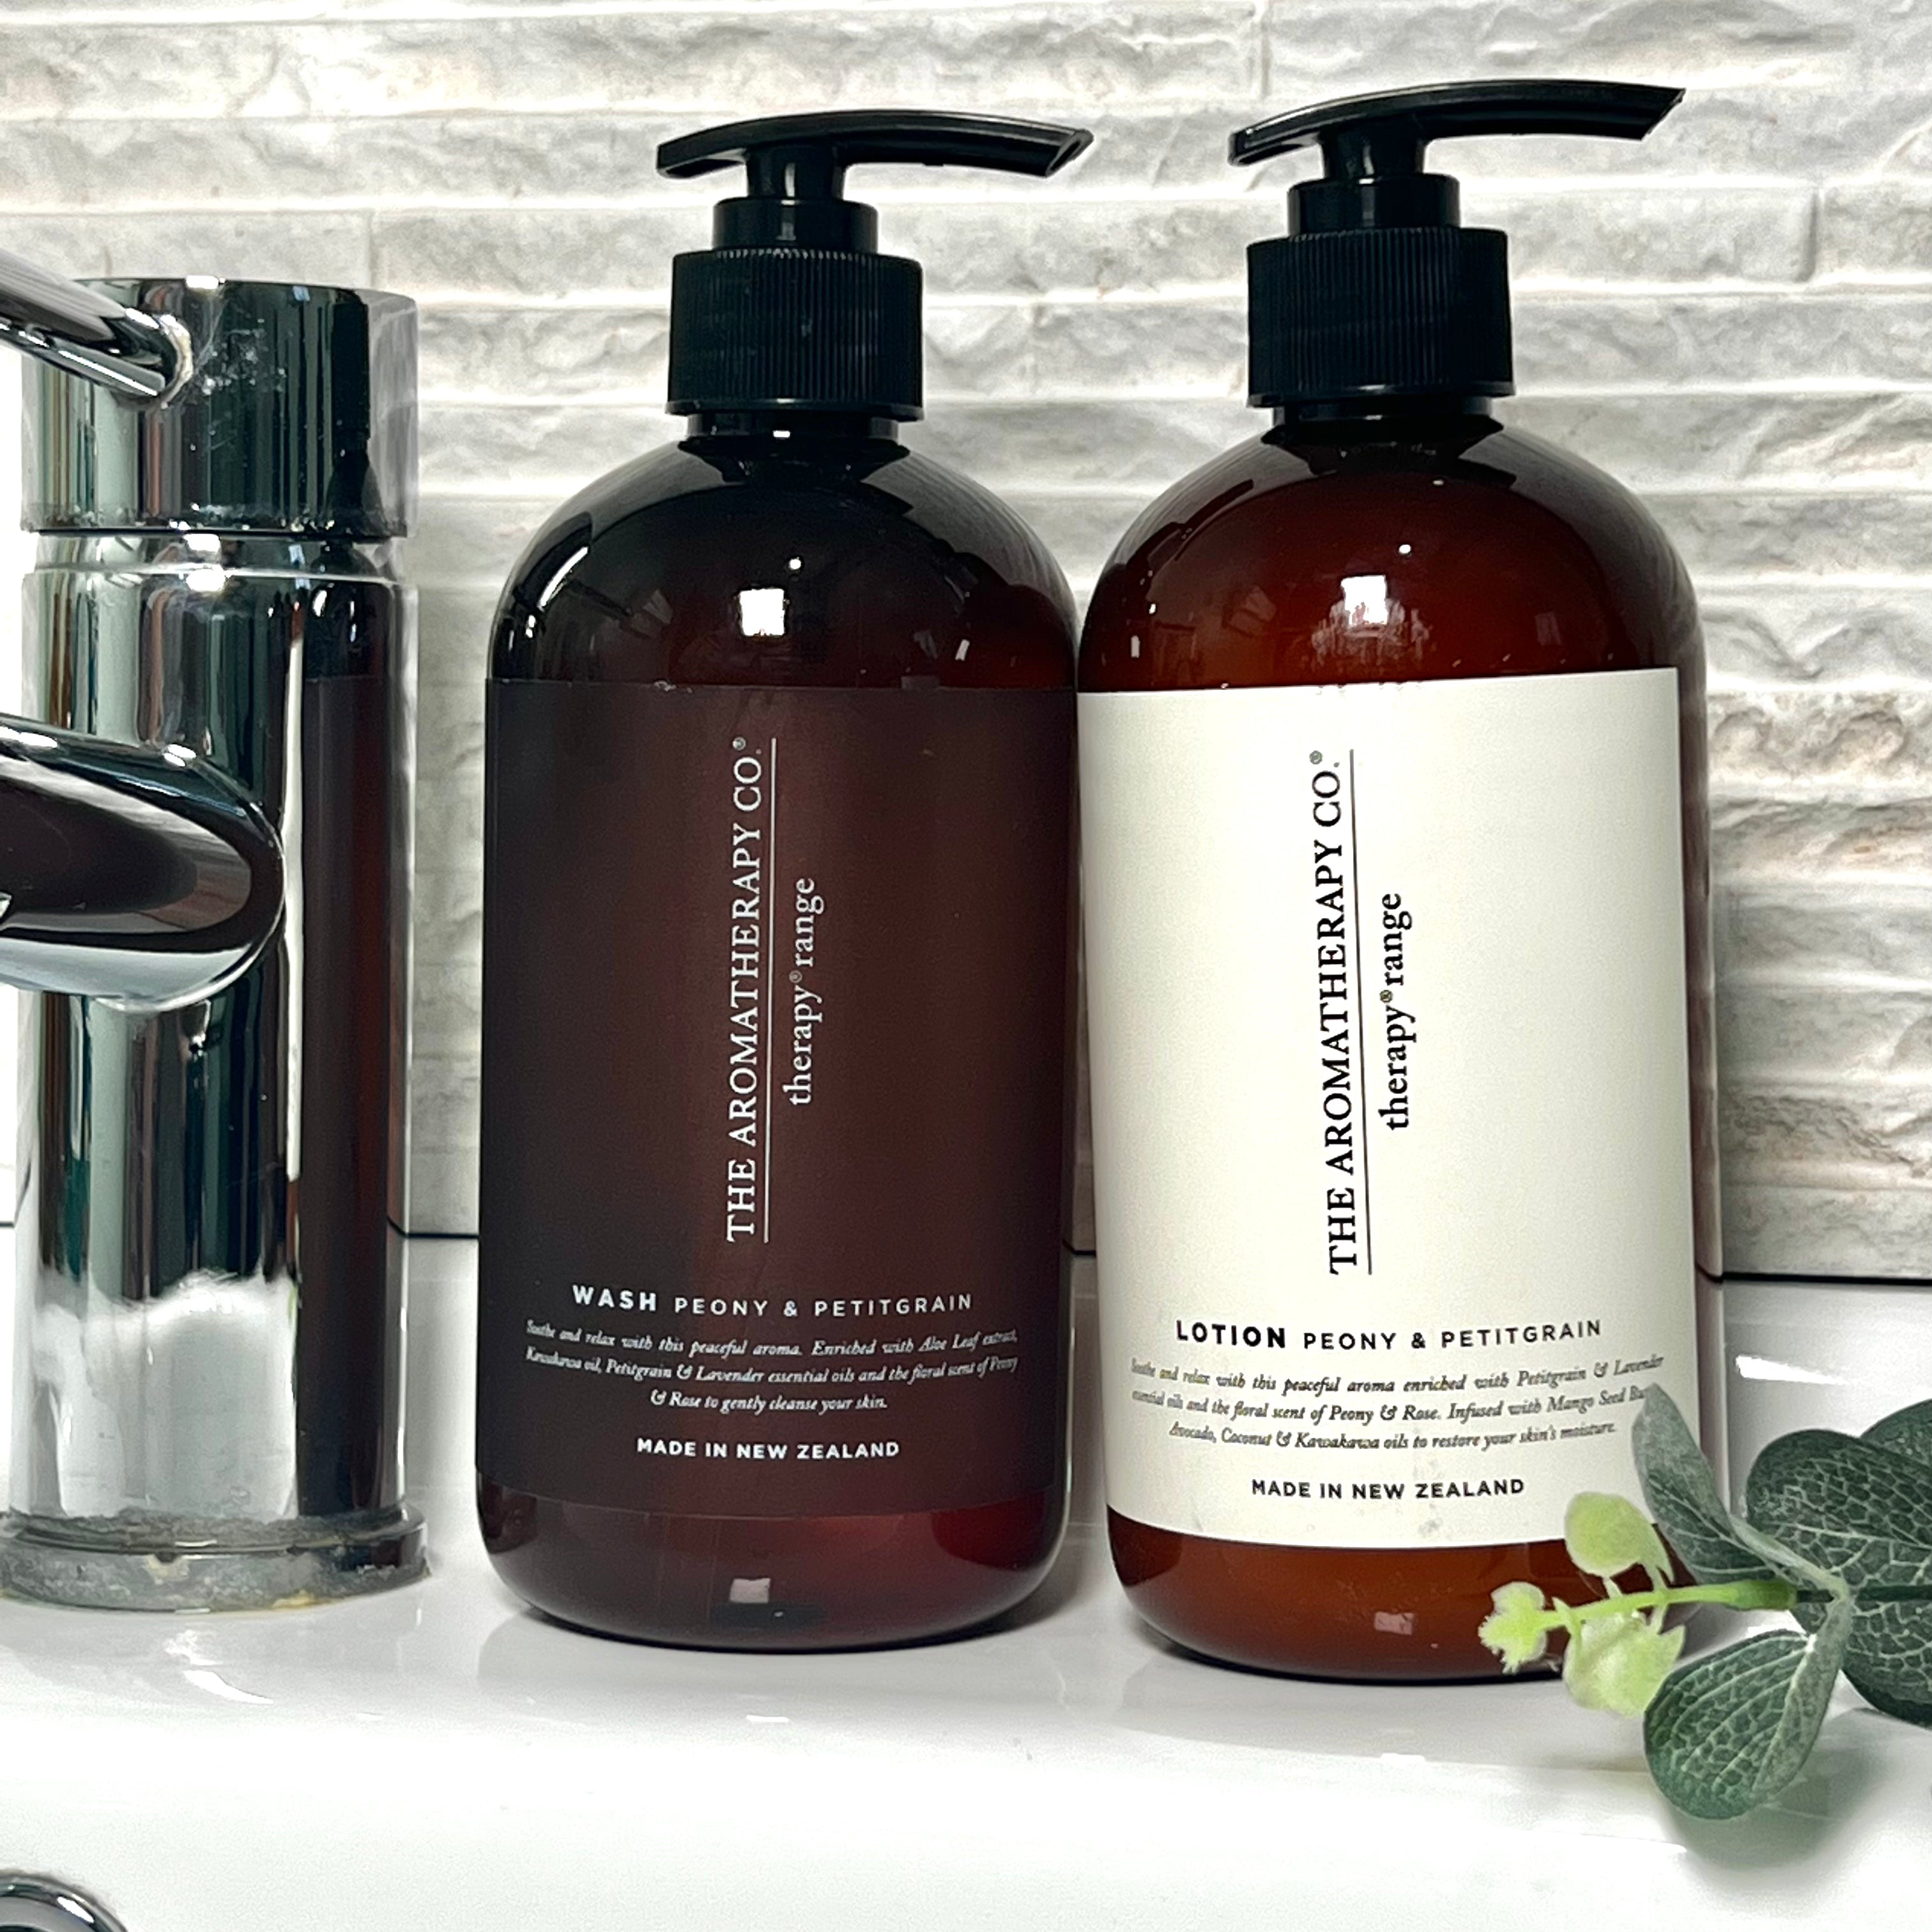 The Aromatherapy Co Therapy Range Soothe Petitgrain & Peony Lotion